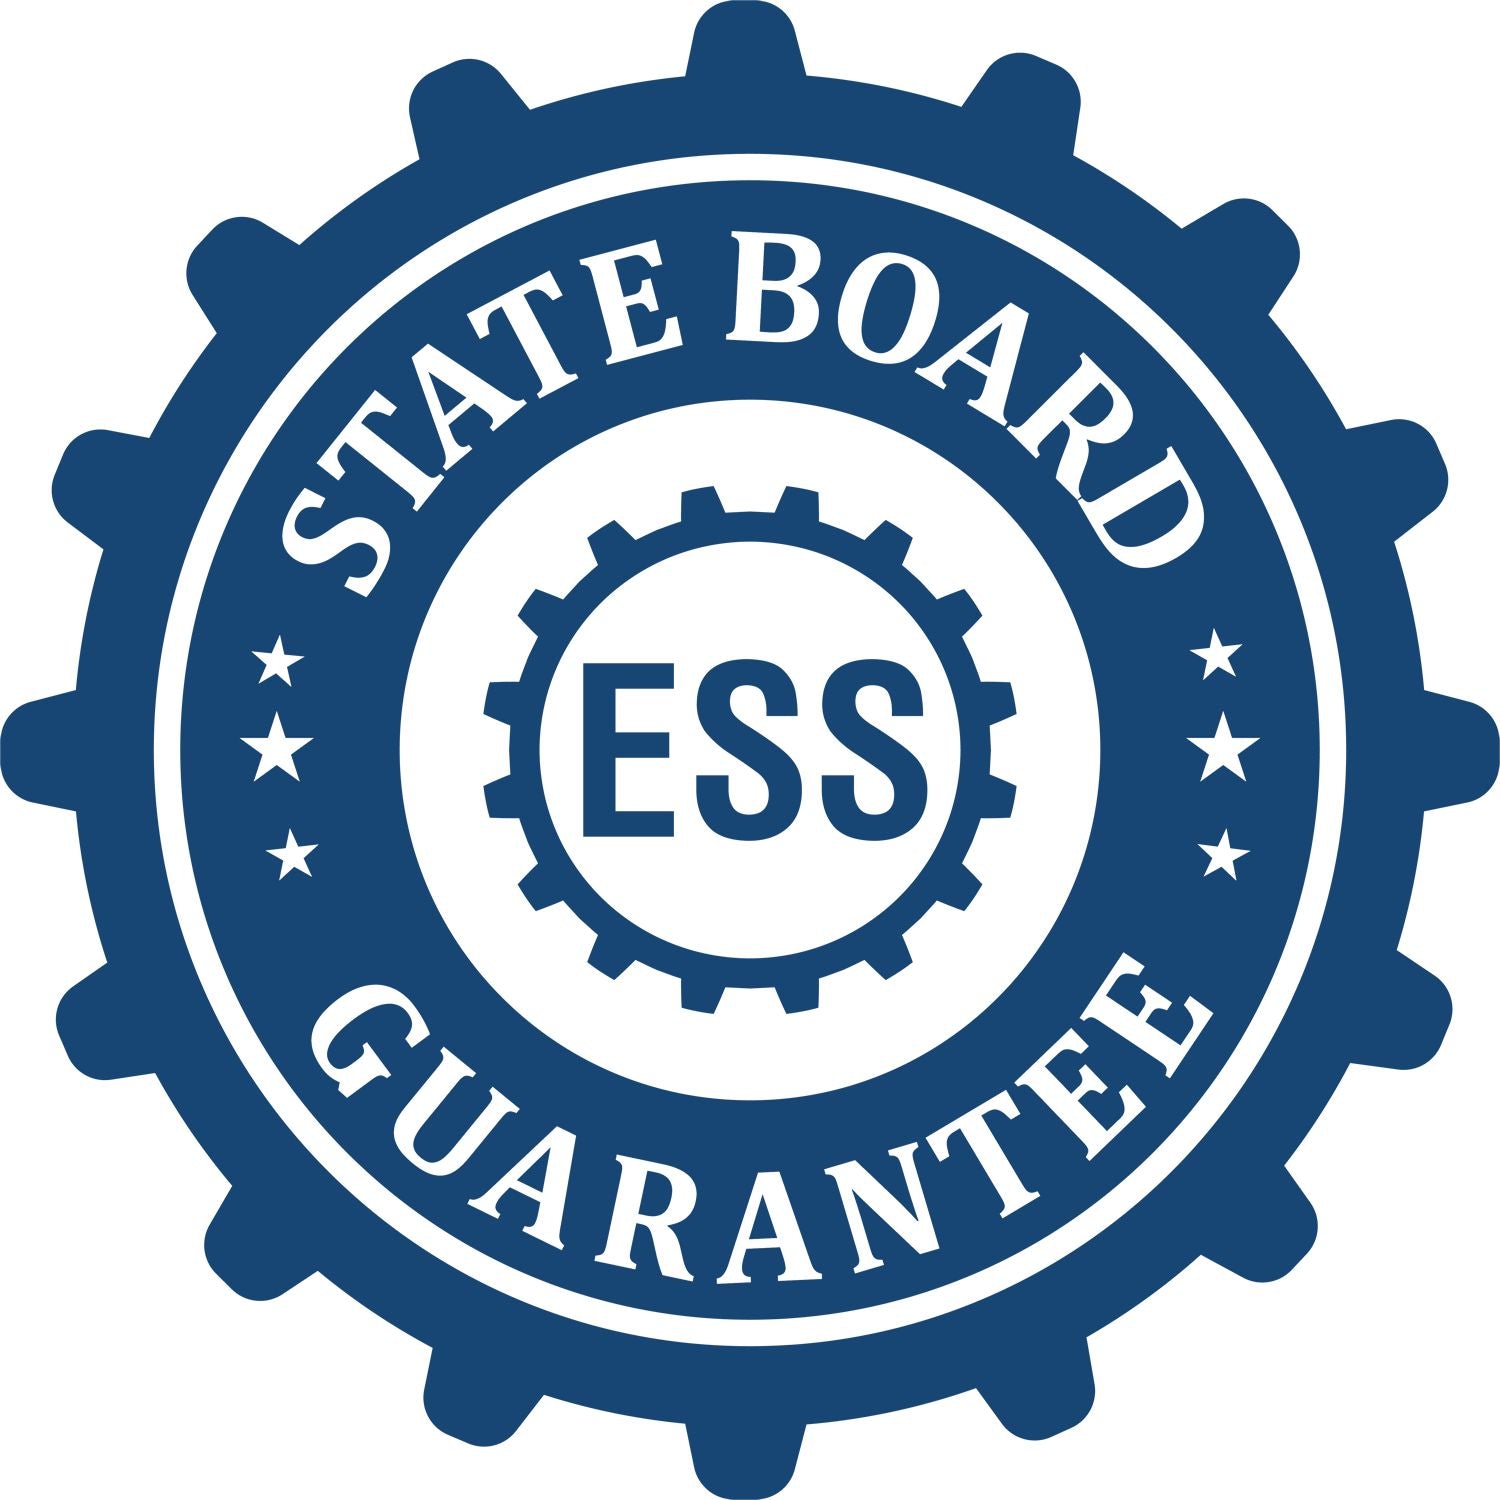 An emblem in a gear shape illustrating a state board guarantee for the Soft Wisconsin Professional Engineer Seal product.